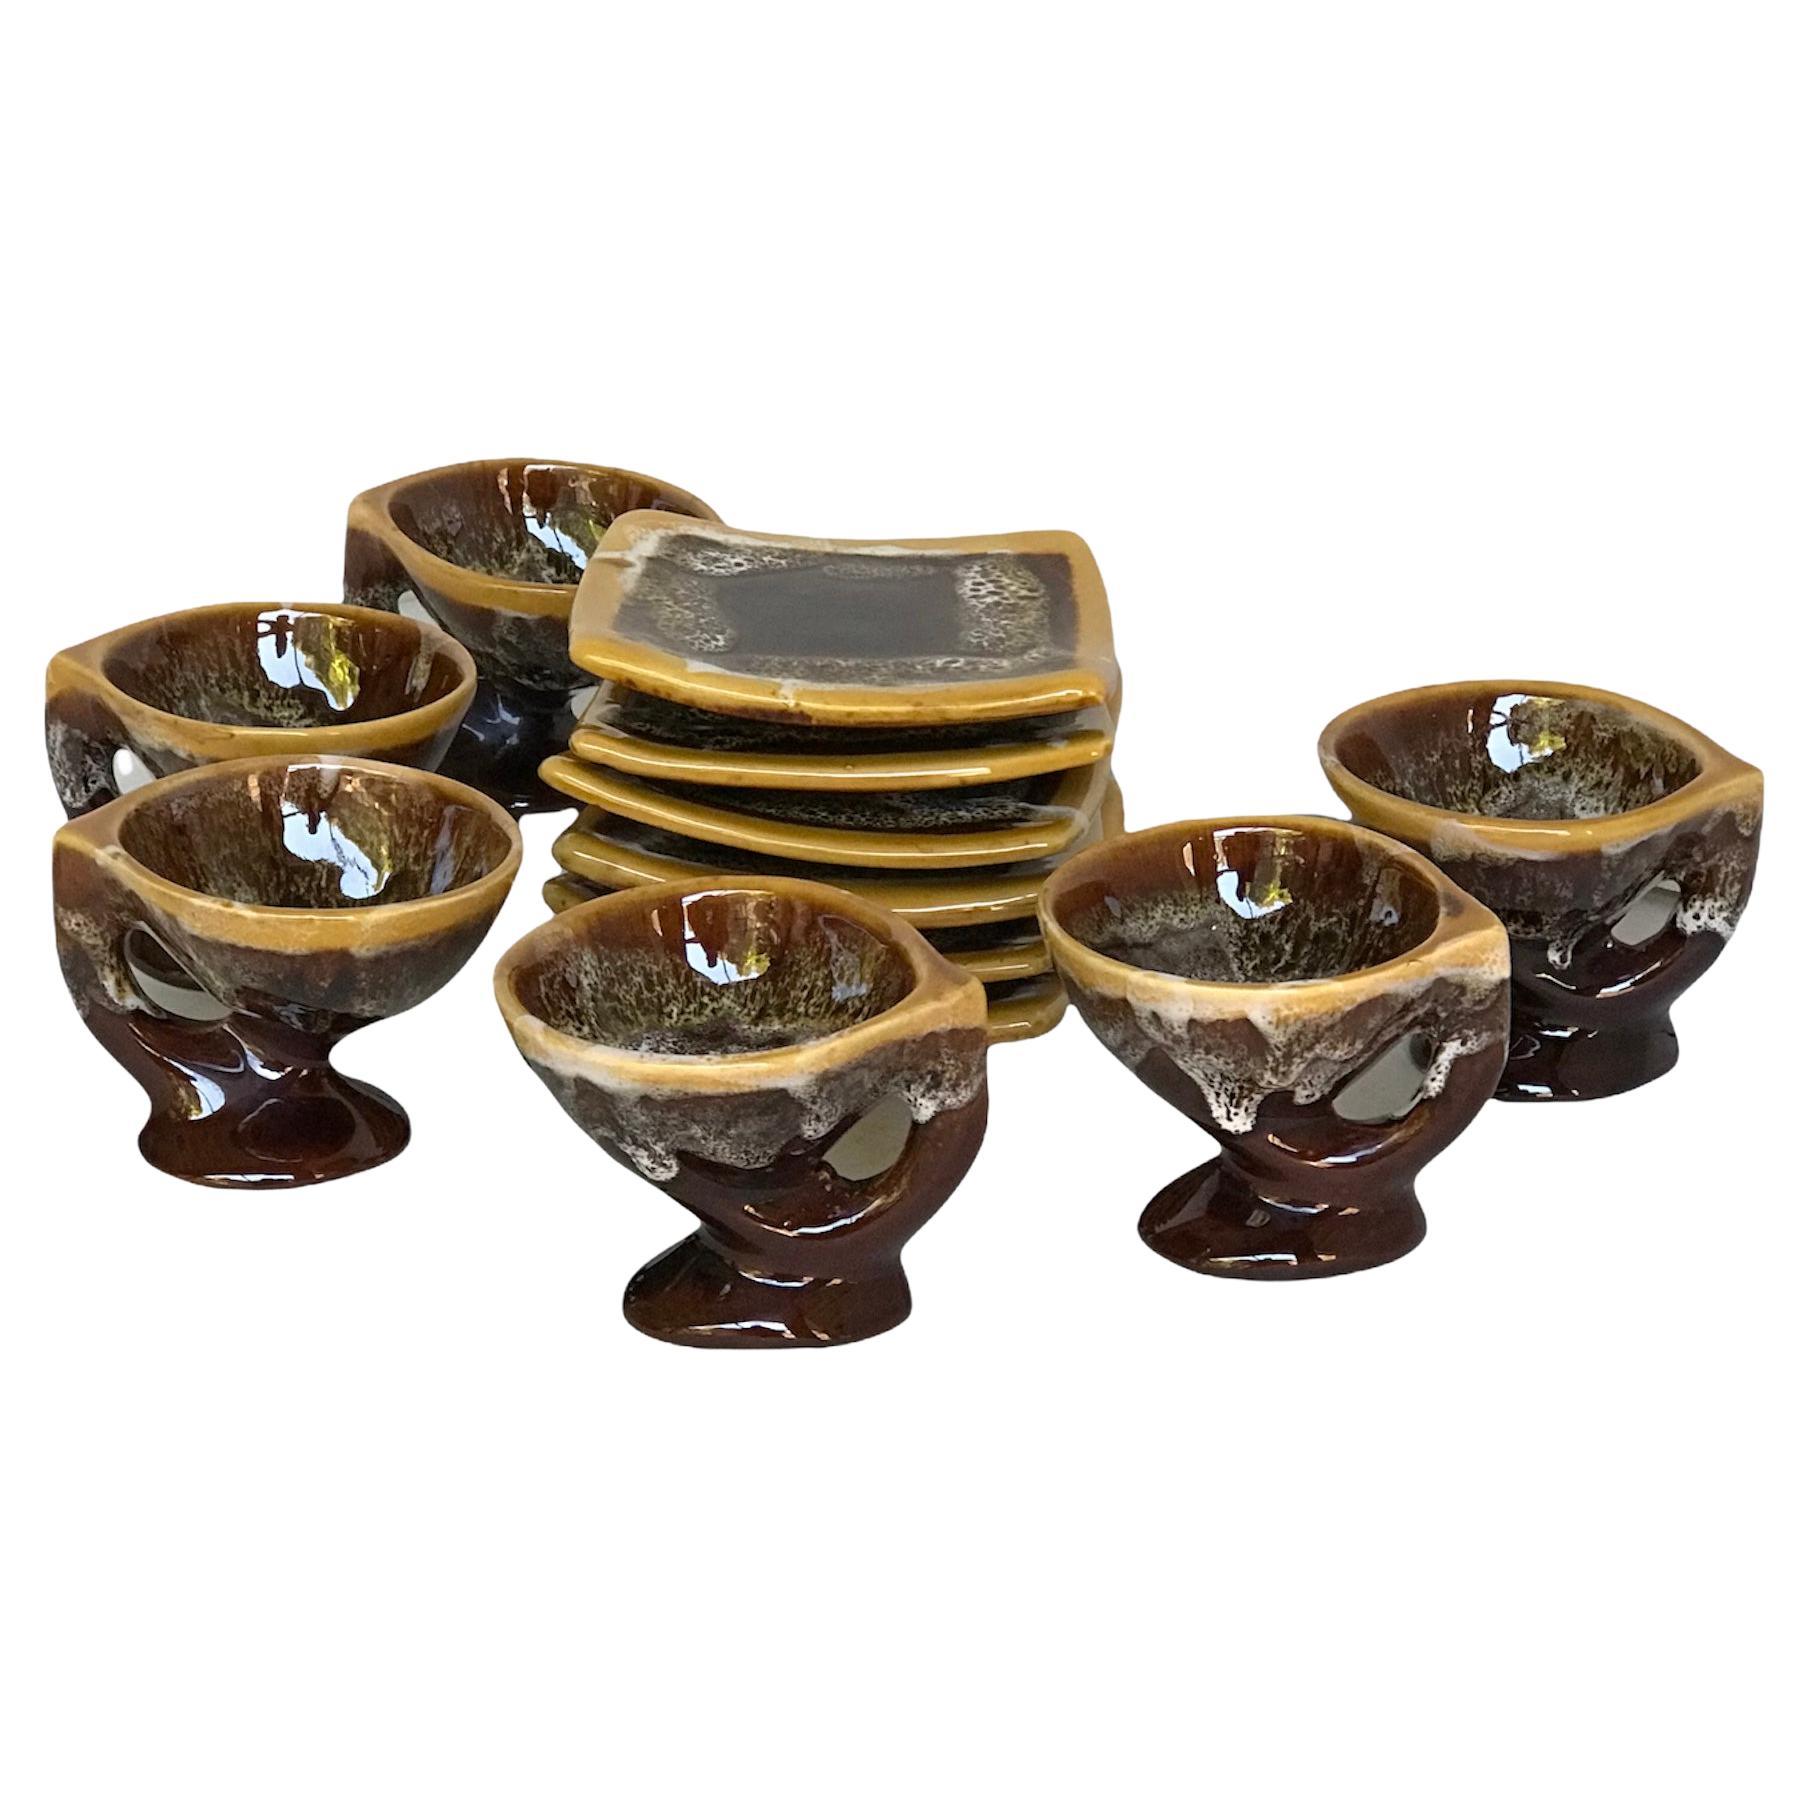 Vallauris France 1950s very modern, Bruatlist or Surreal ceramic Set of 6 Demitasse Cups and Plates. With the typical lava glaze of Vallauris pottery in white glaze dripping over dark brown body with a mustard color rim. The plates do not have the